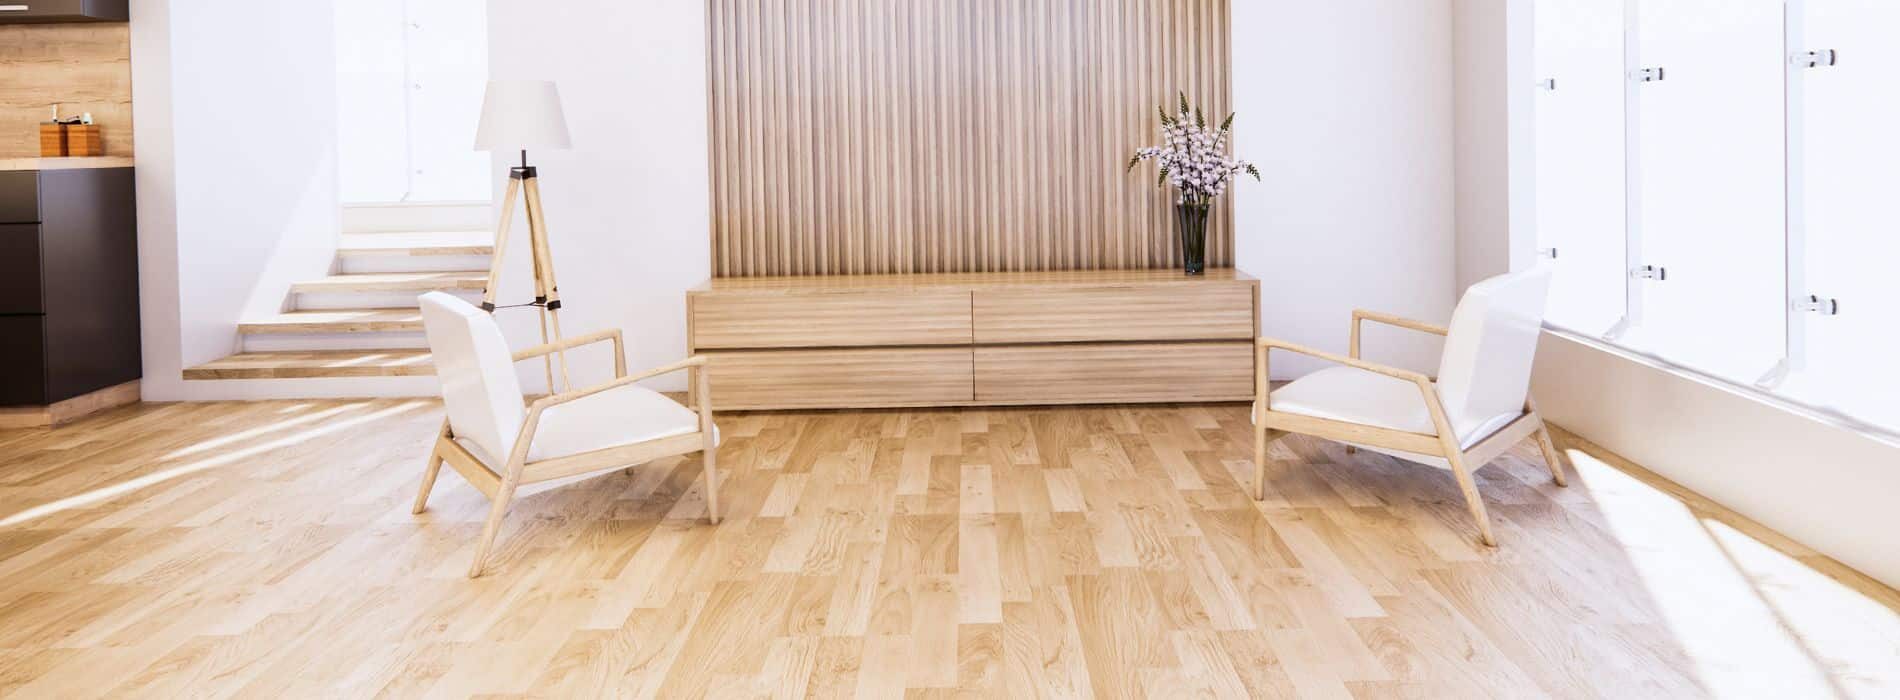 Stunning 6-year-old hardwood parquet floor expertly restored in Fitzrovia, W1. Bona 2.5K Frost whitewashing and Traffic HD 20% sheen matte lacquer were applied by Mr Sander®, ensuring durability and long-lasting beauty